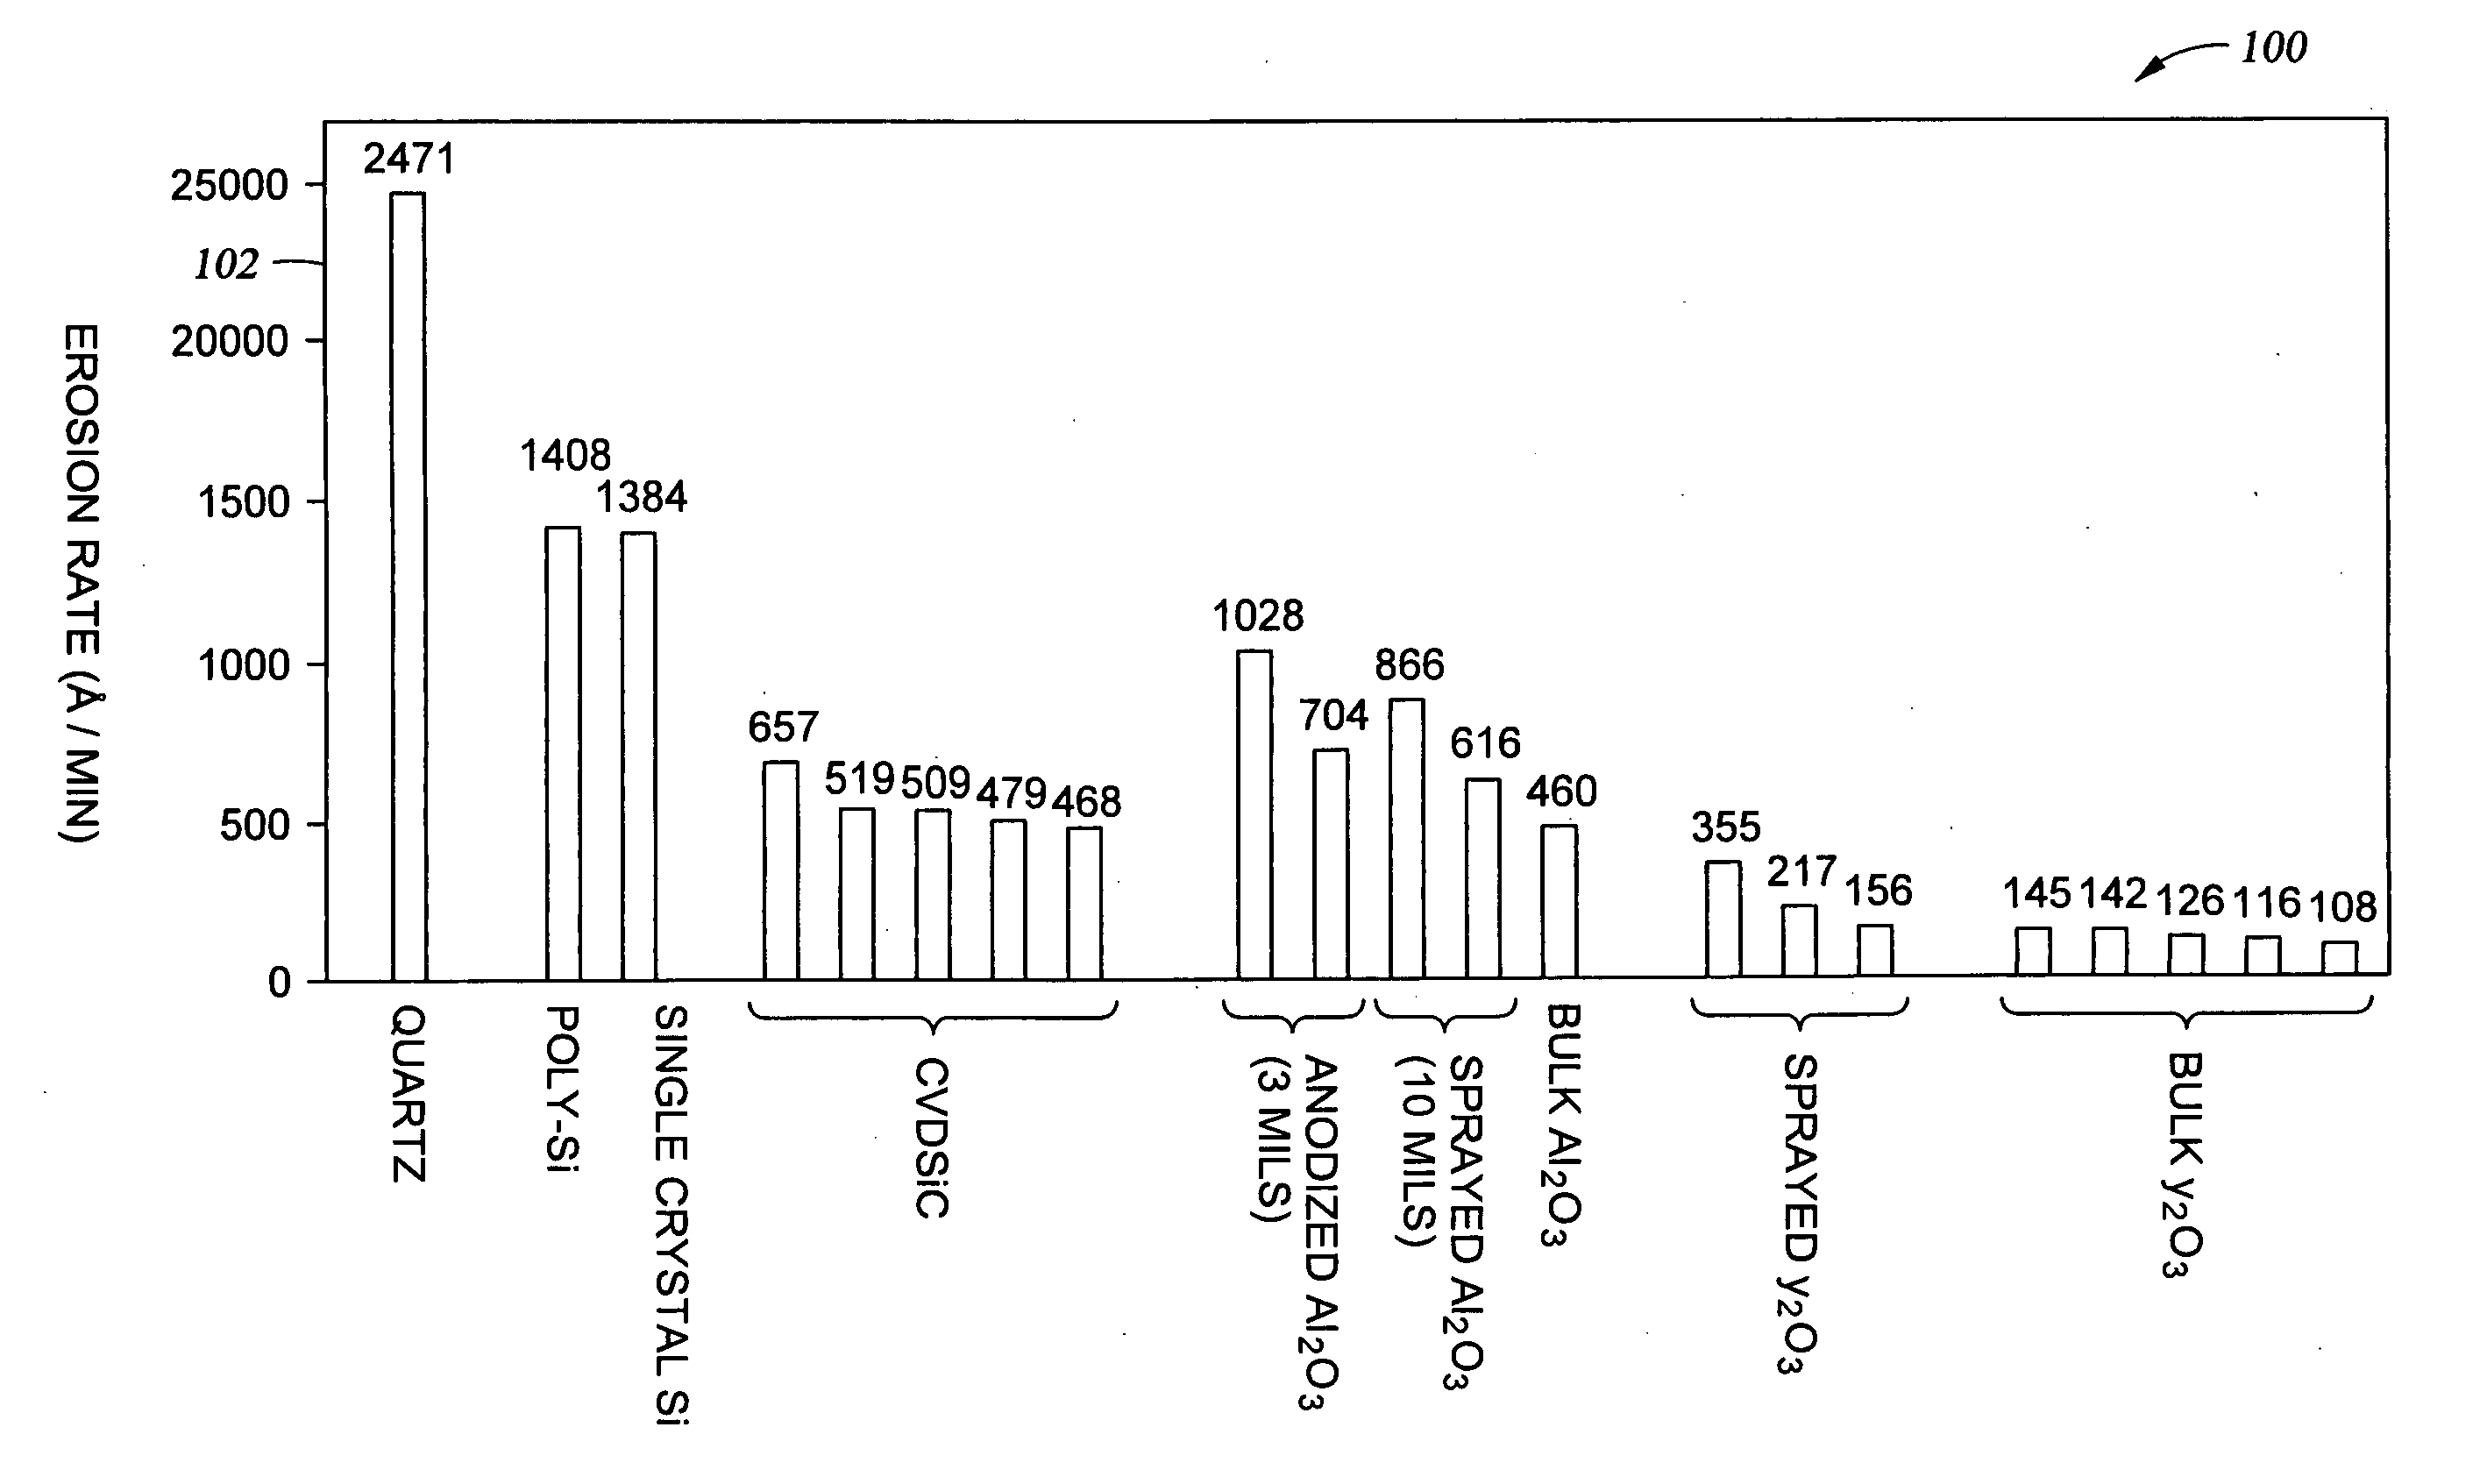 Cleaning method used in removing contaminants from a solid yttrium oxide-containing substrate